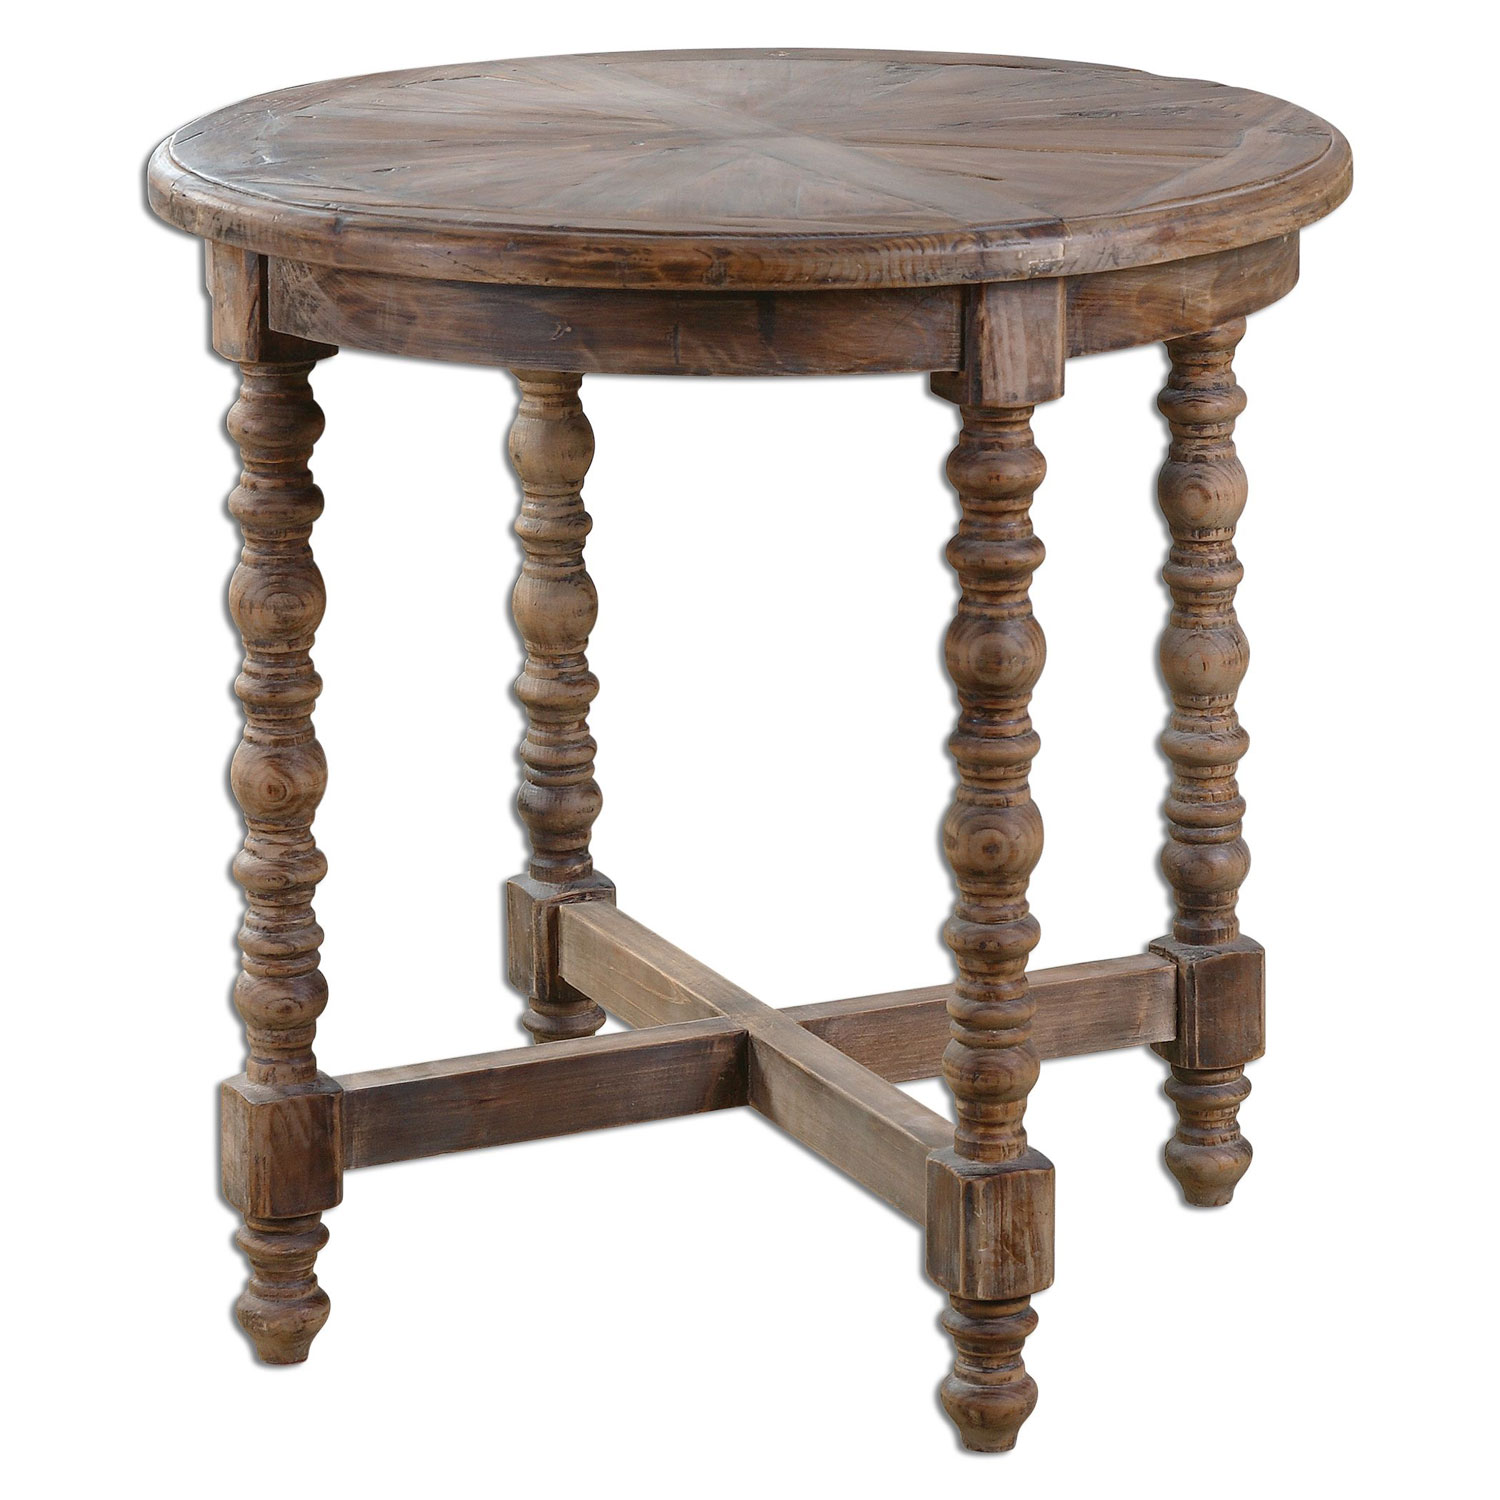 uttermost samuelle reclaimed fir wood end table bellacor outdoor accent hover zoom astoria grand bedroom furniture shade and light pier one clearance metal door threshold strips